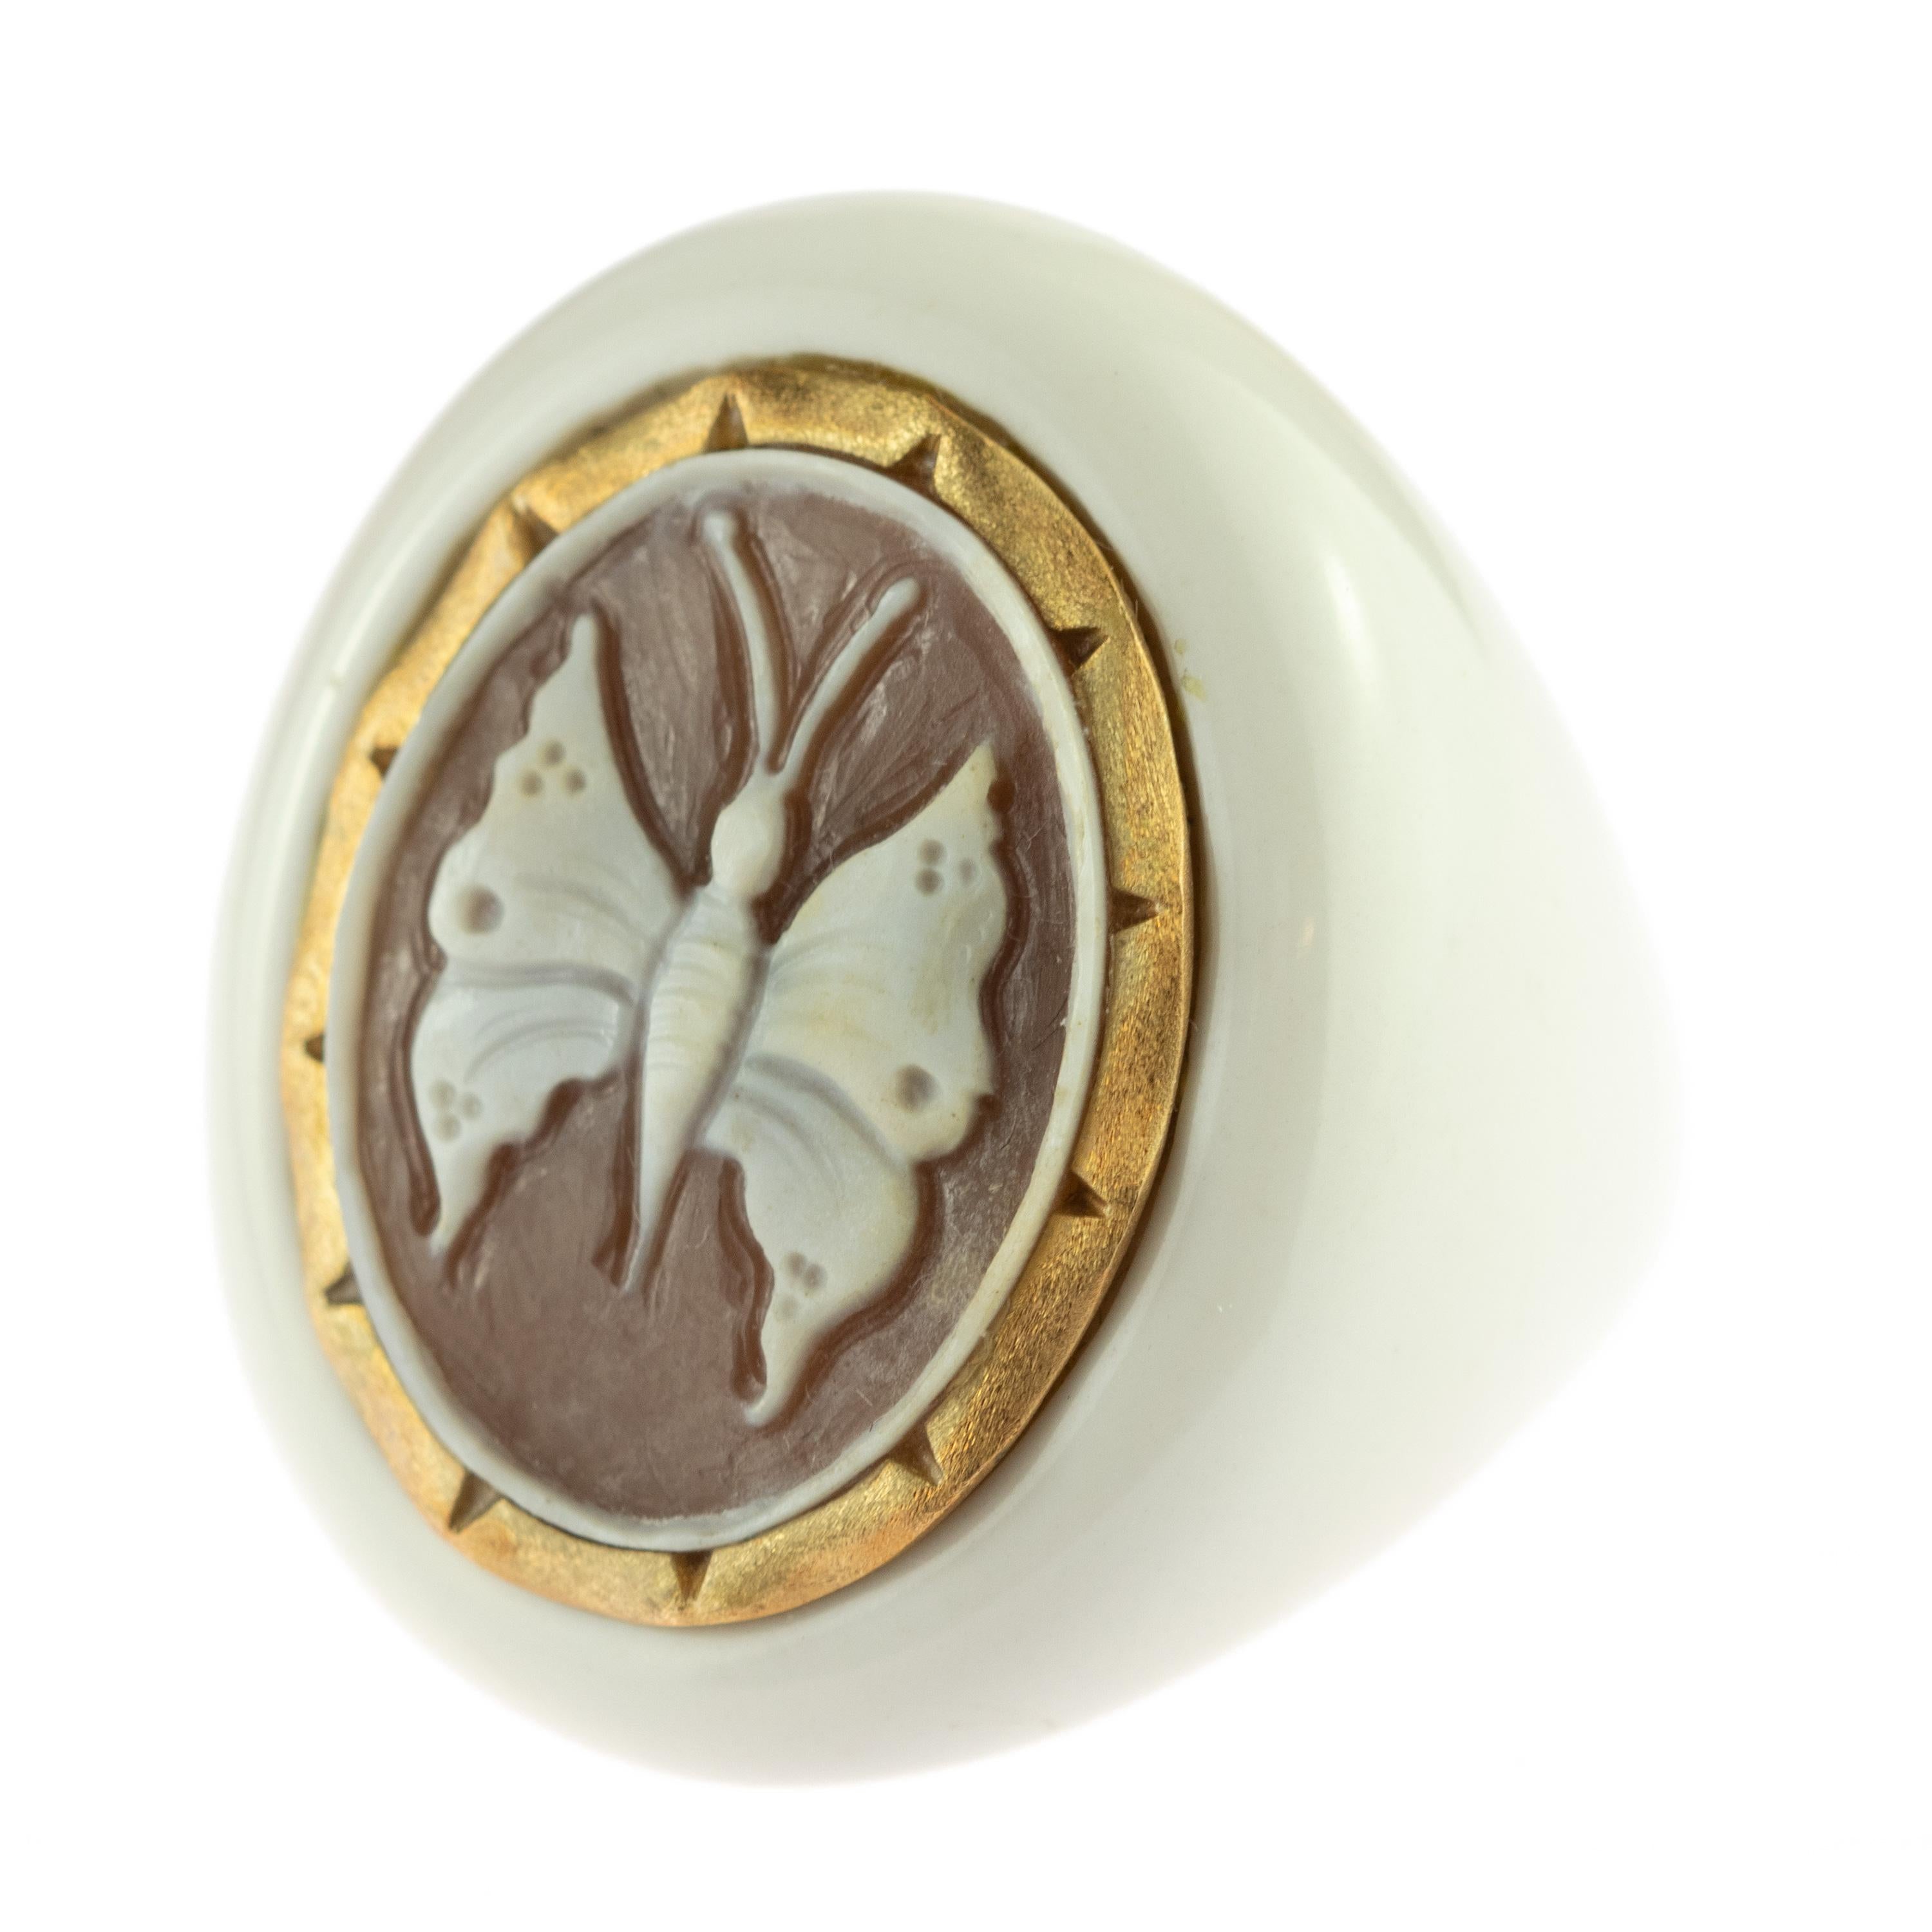 A unique and breathtaking jewel with a central carved sardonic shell representing a white butterfly, mounted on a white resin ring setting.. A precious jewel surrounded by 18 an karat yellow gold line creating a beautiful art piece. Marvelous